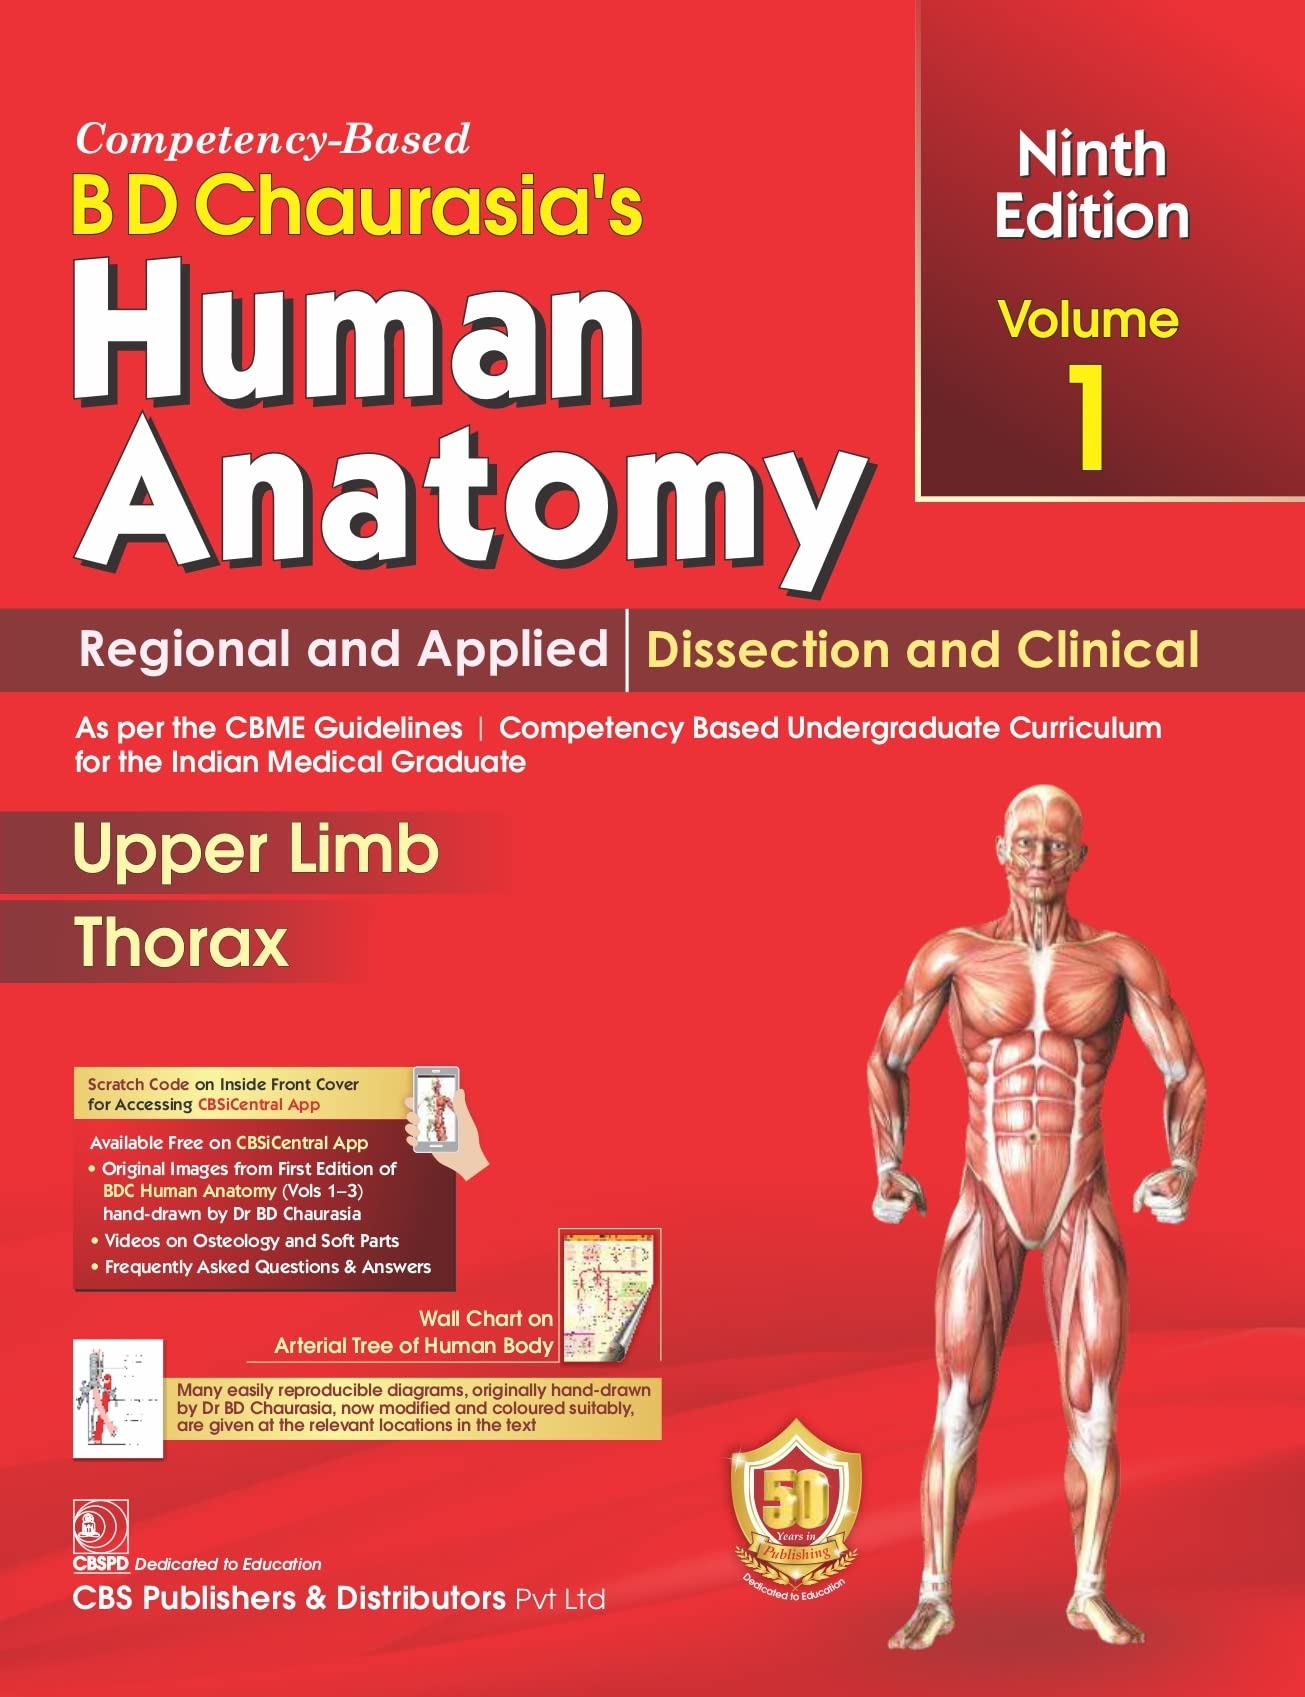 BD CHAURASIAS HUMAN ANATOMY 9ED VOL -1 REGIONAL AND APPLIED DISSECTION & CLINICAL (BDC)